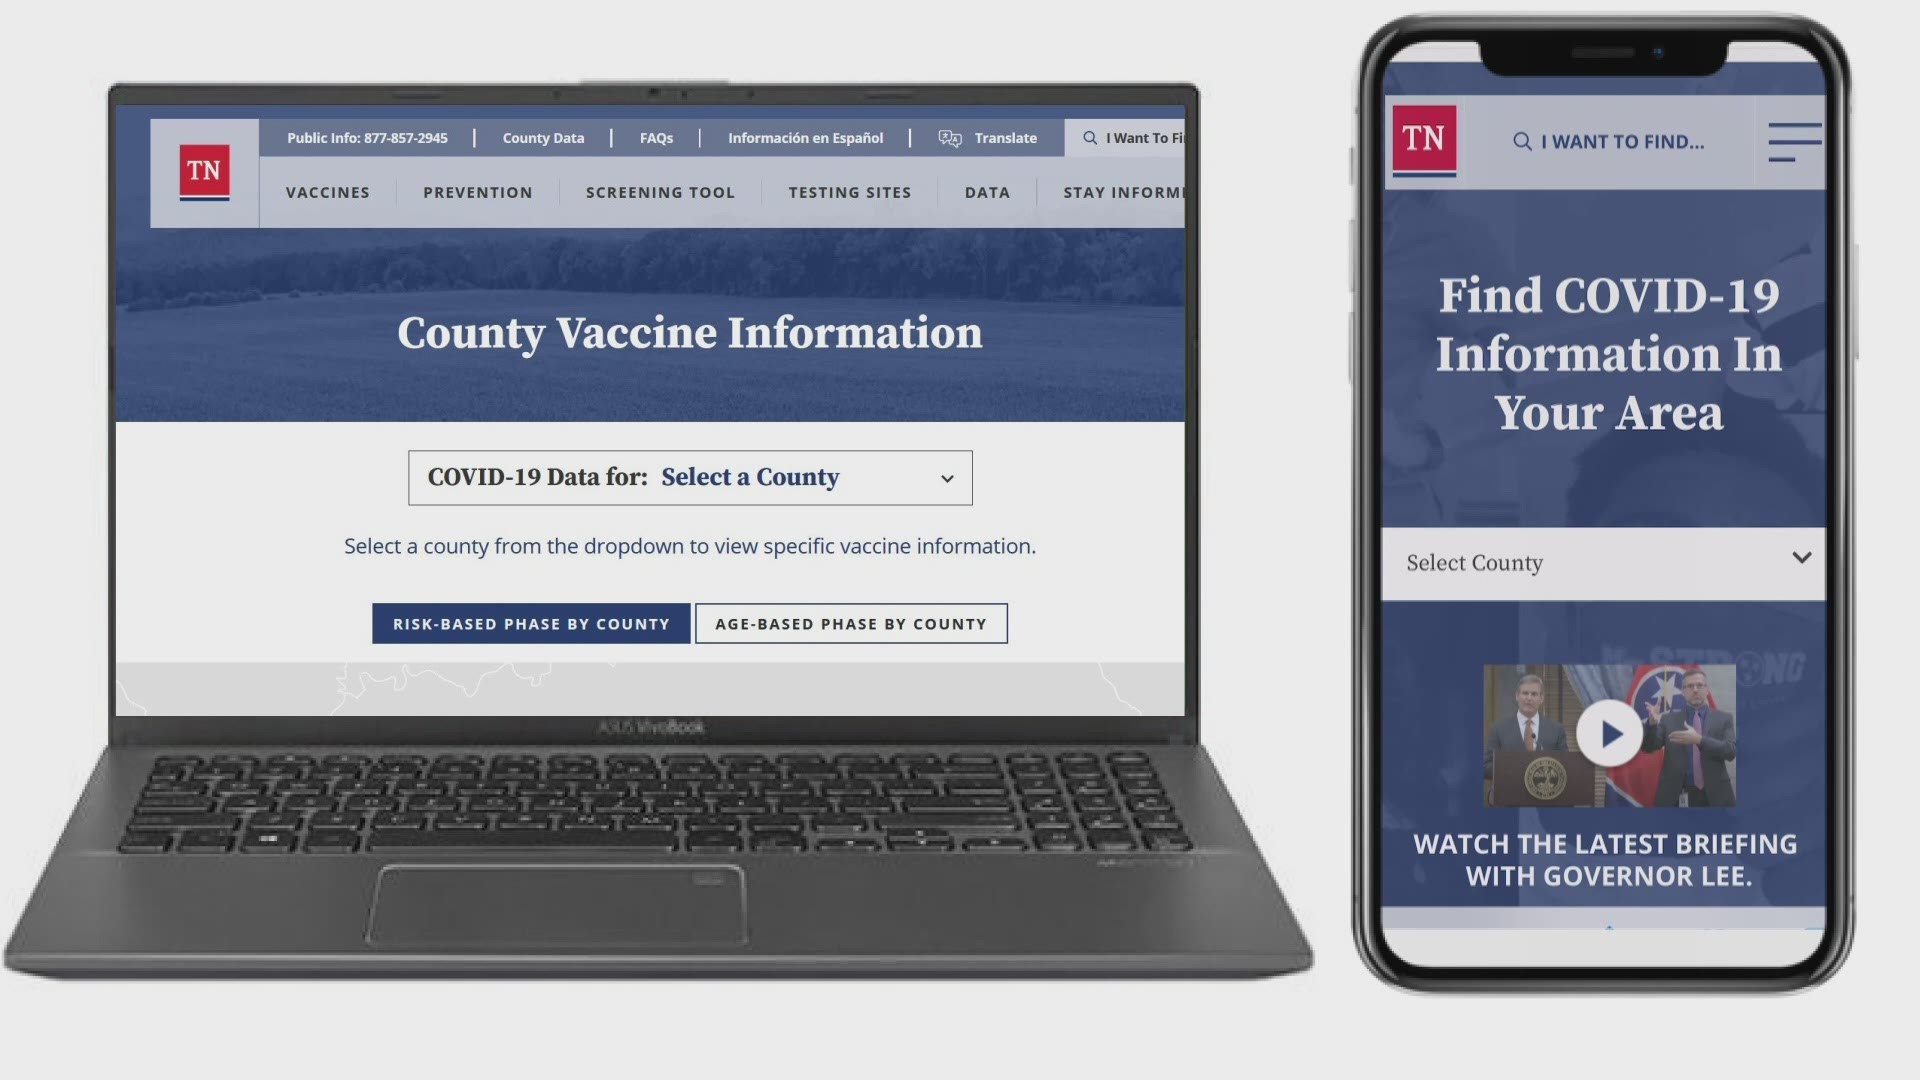 We know there are a lot of questions about the COVID-19 vaccine rollout here in East TN, we're here to walk you through how to make an online appointment.